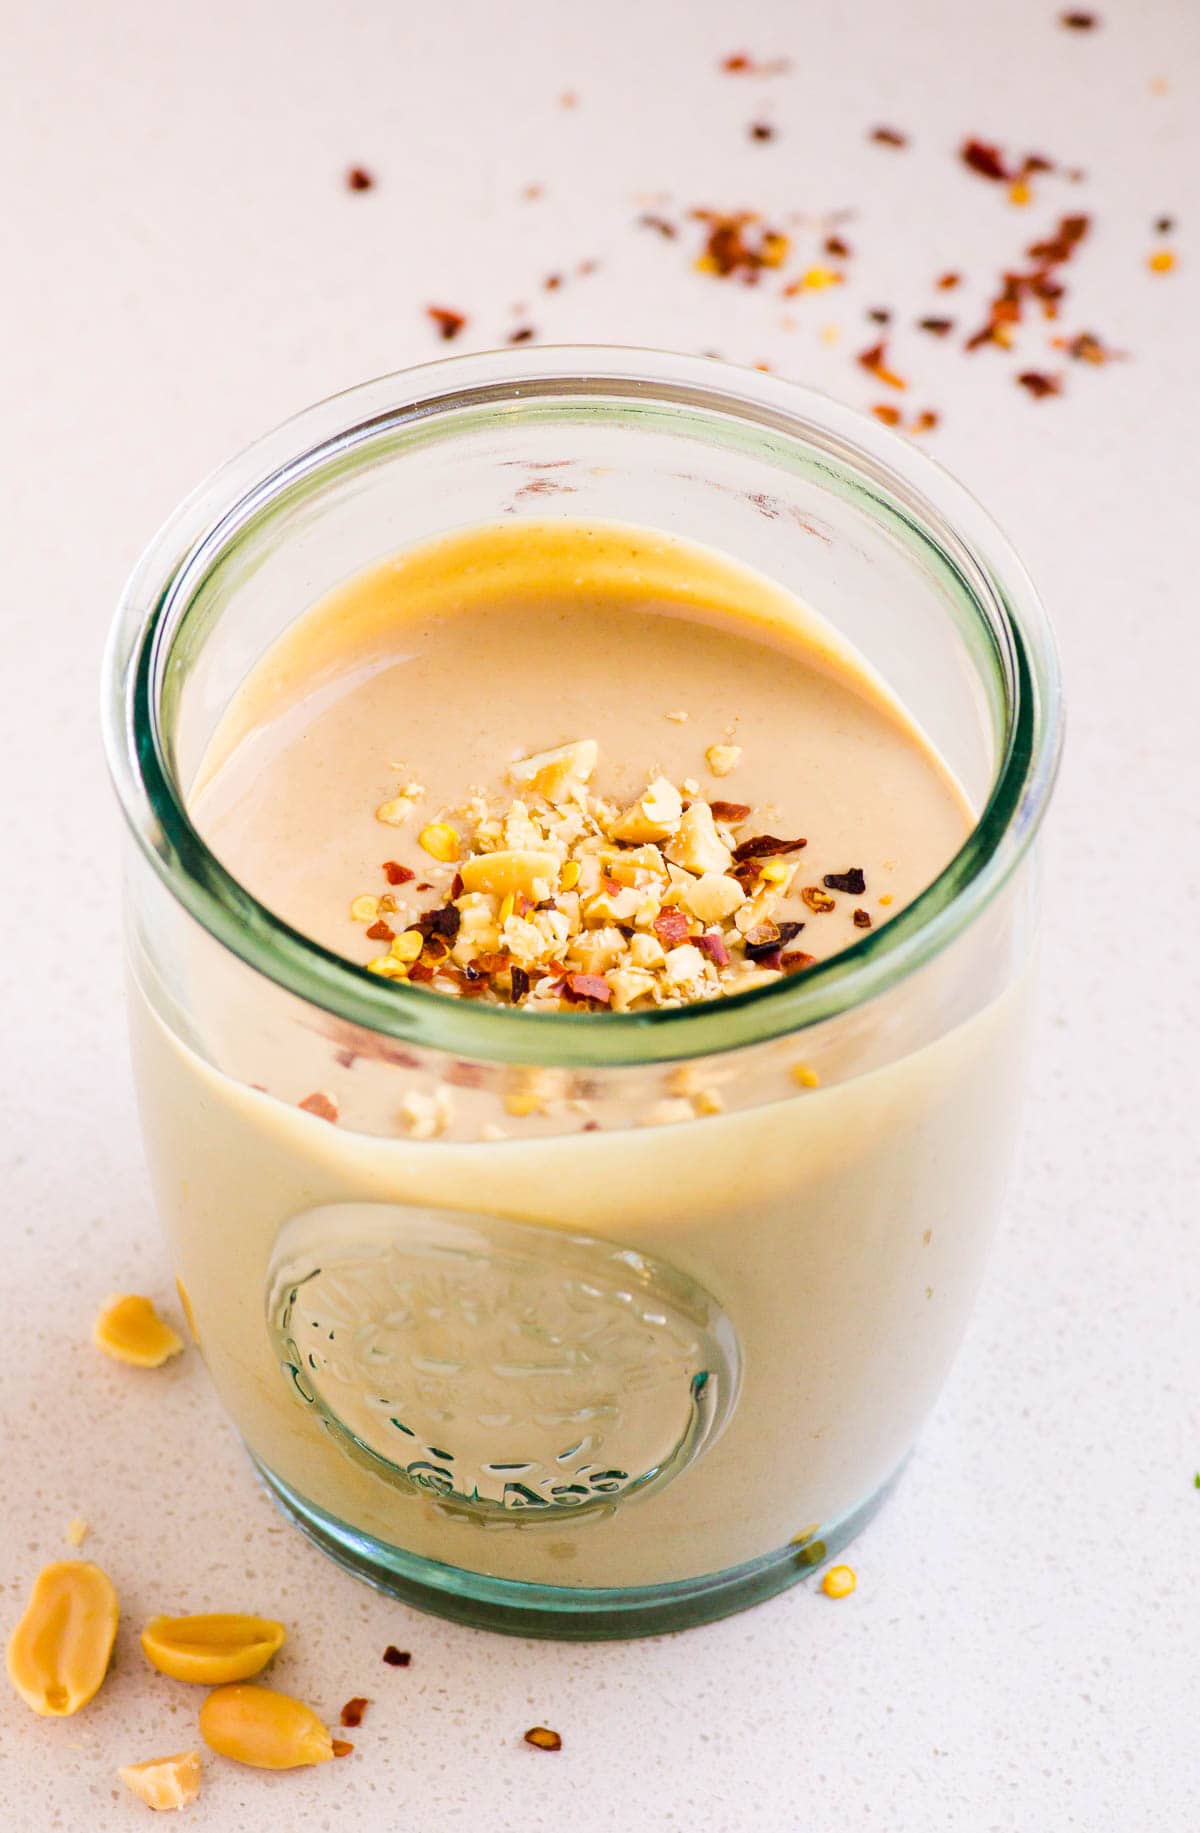 homemade peanut sauce in glass jar with peanuts and chili pepper